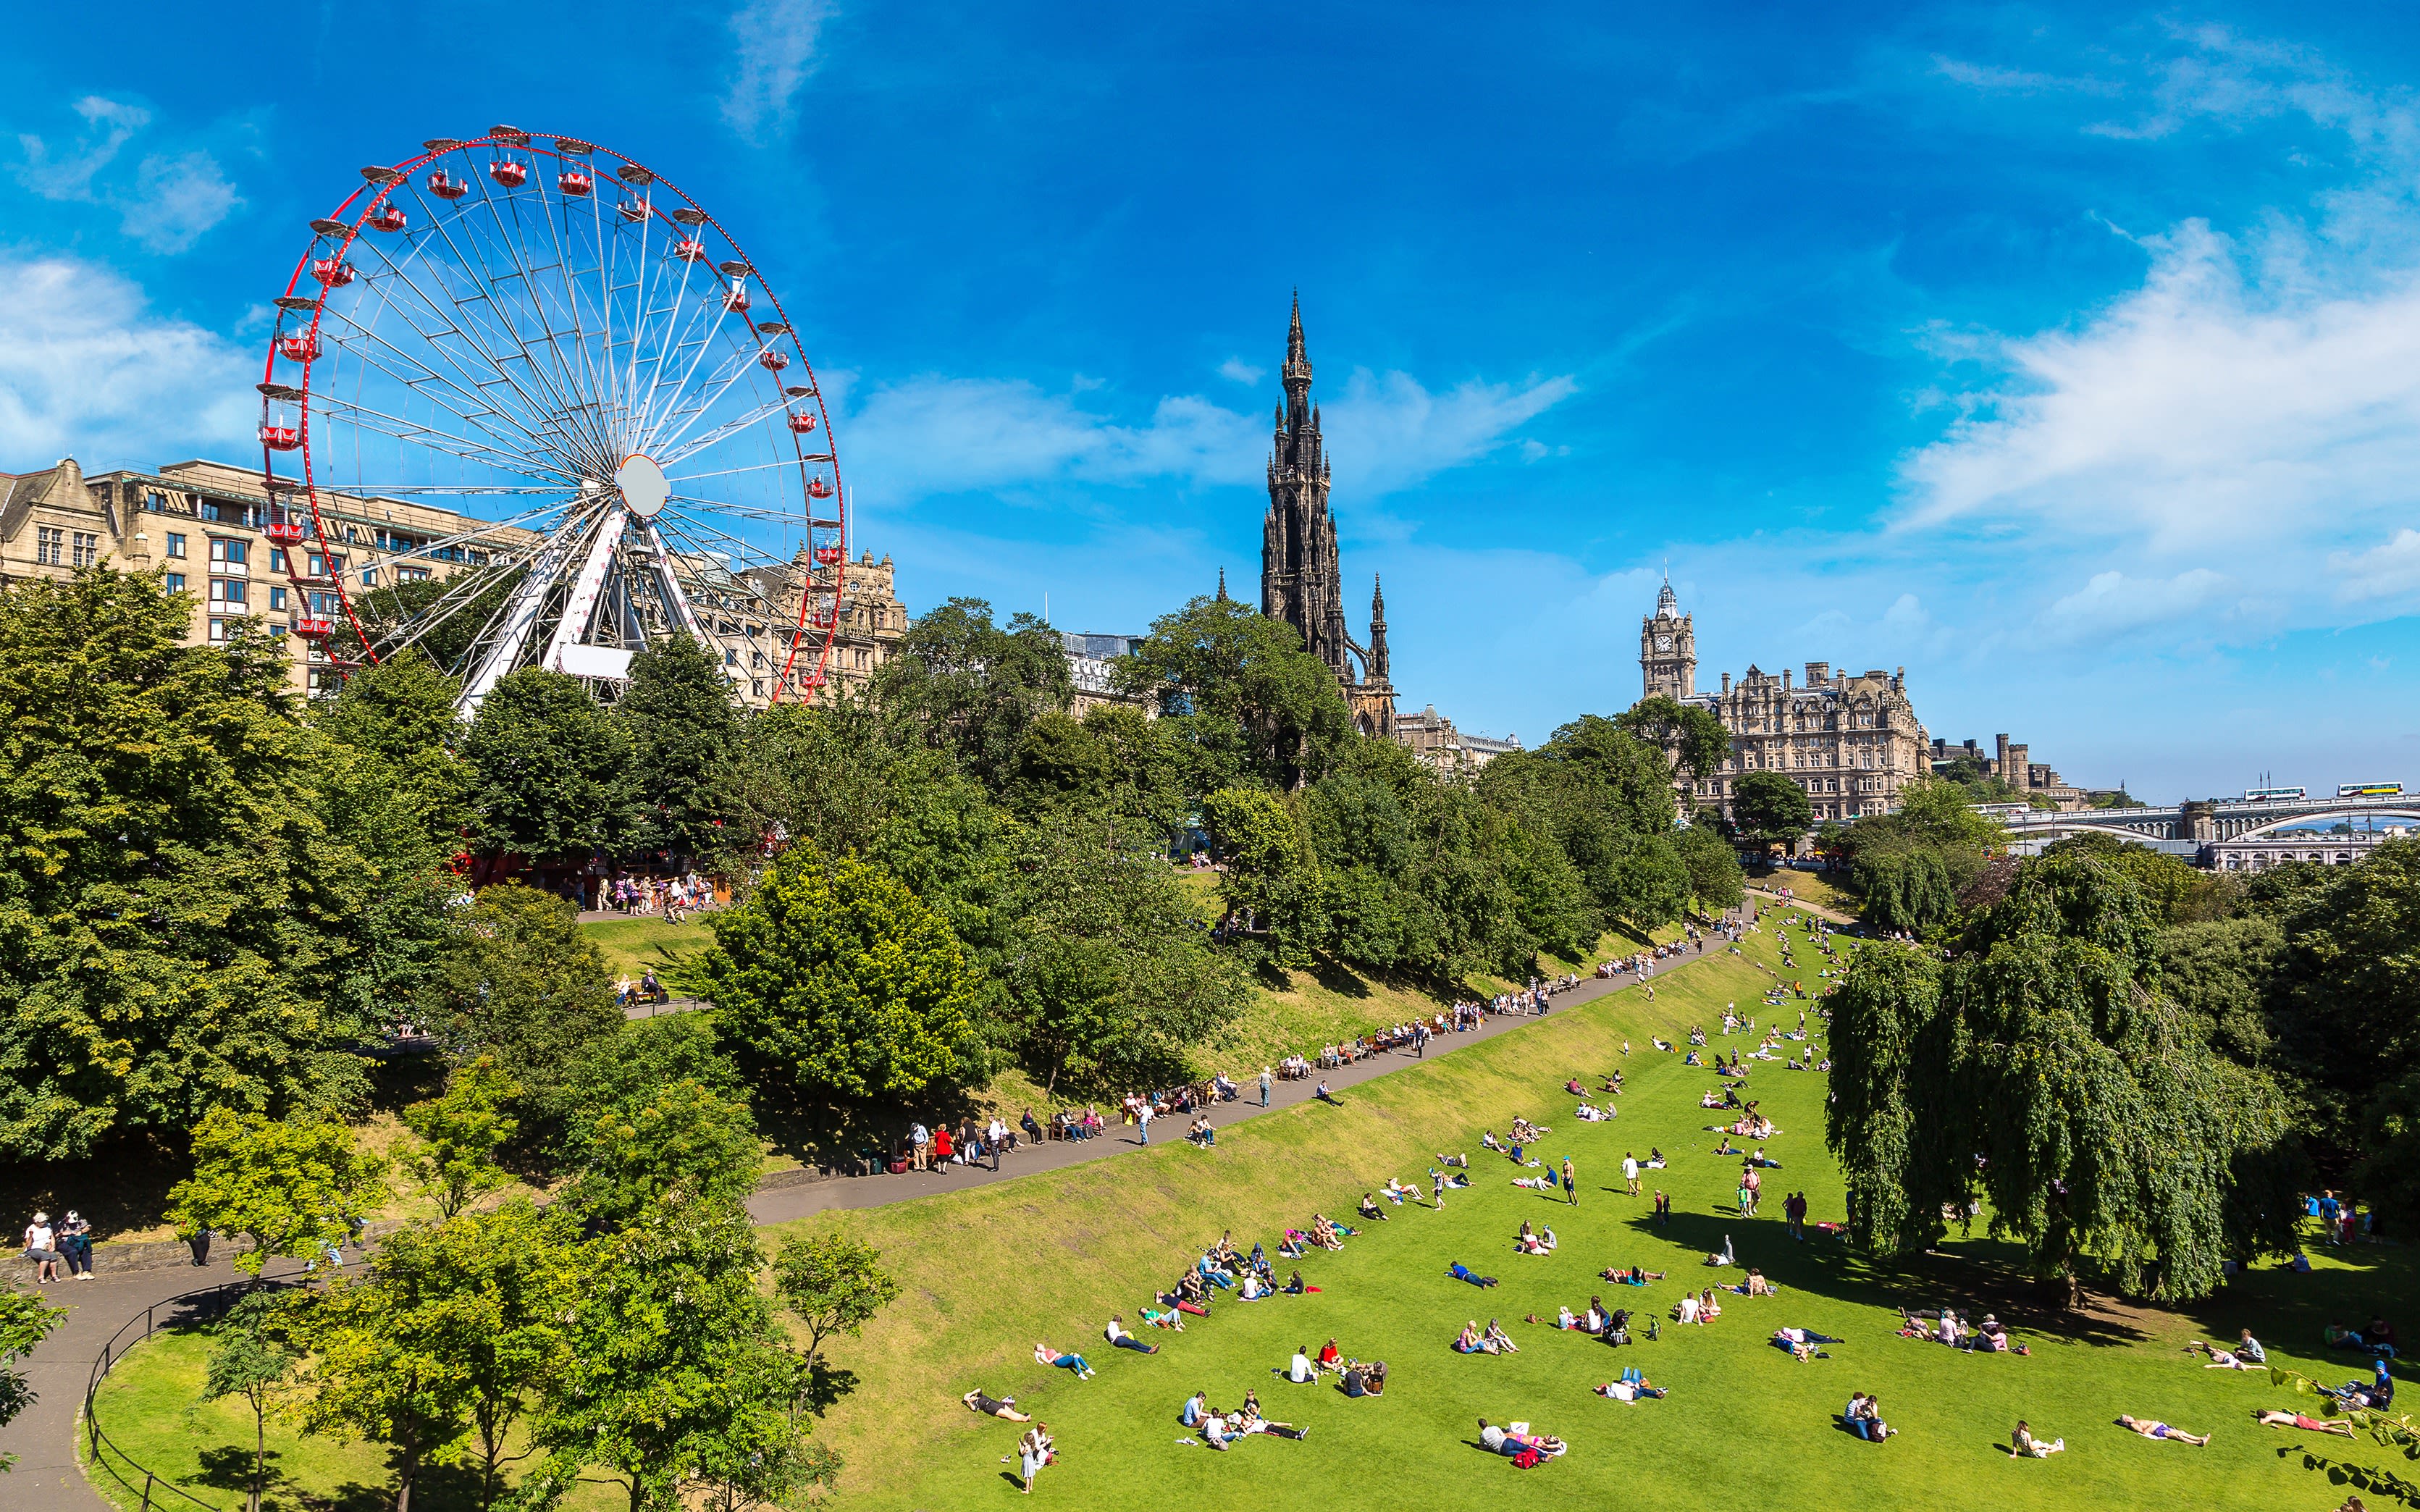 An image of the capital city of Edinburgh on a summer day